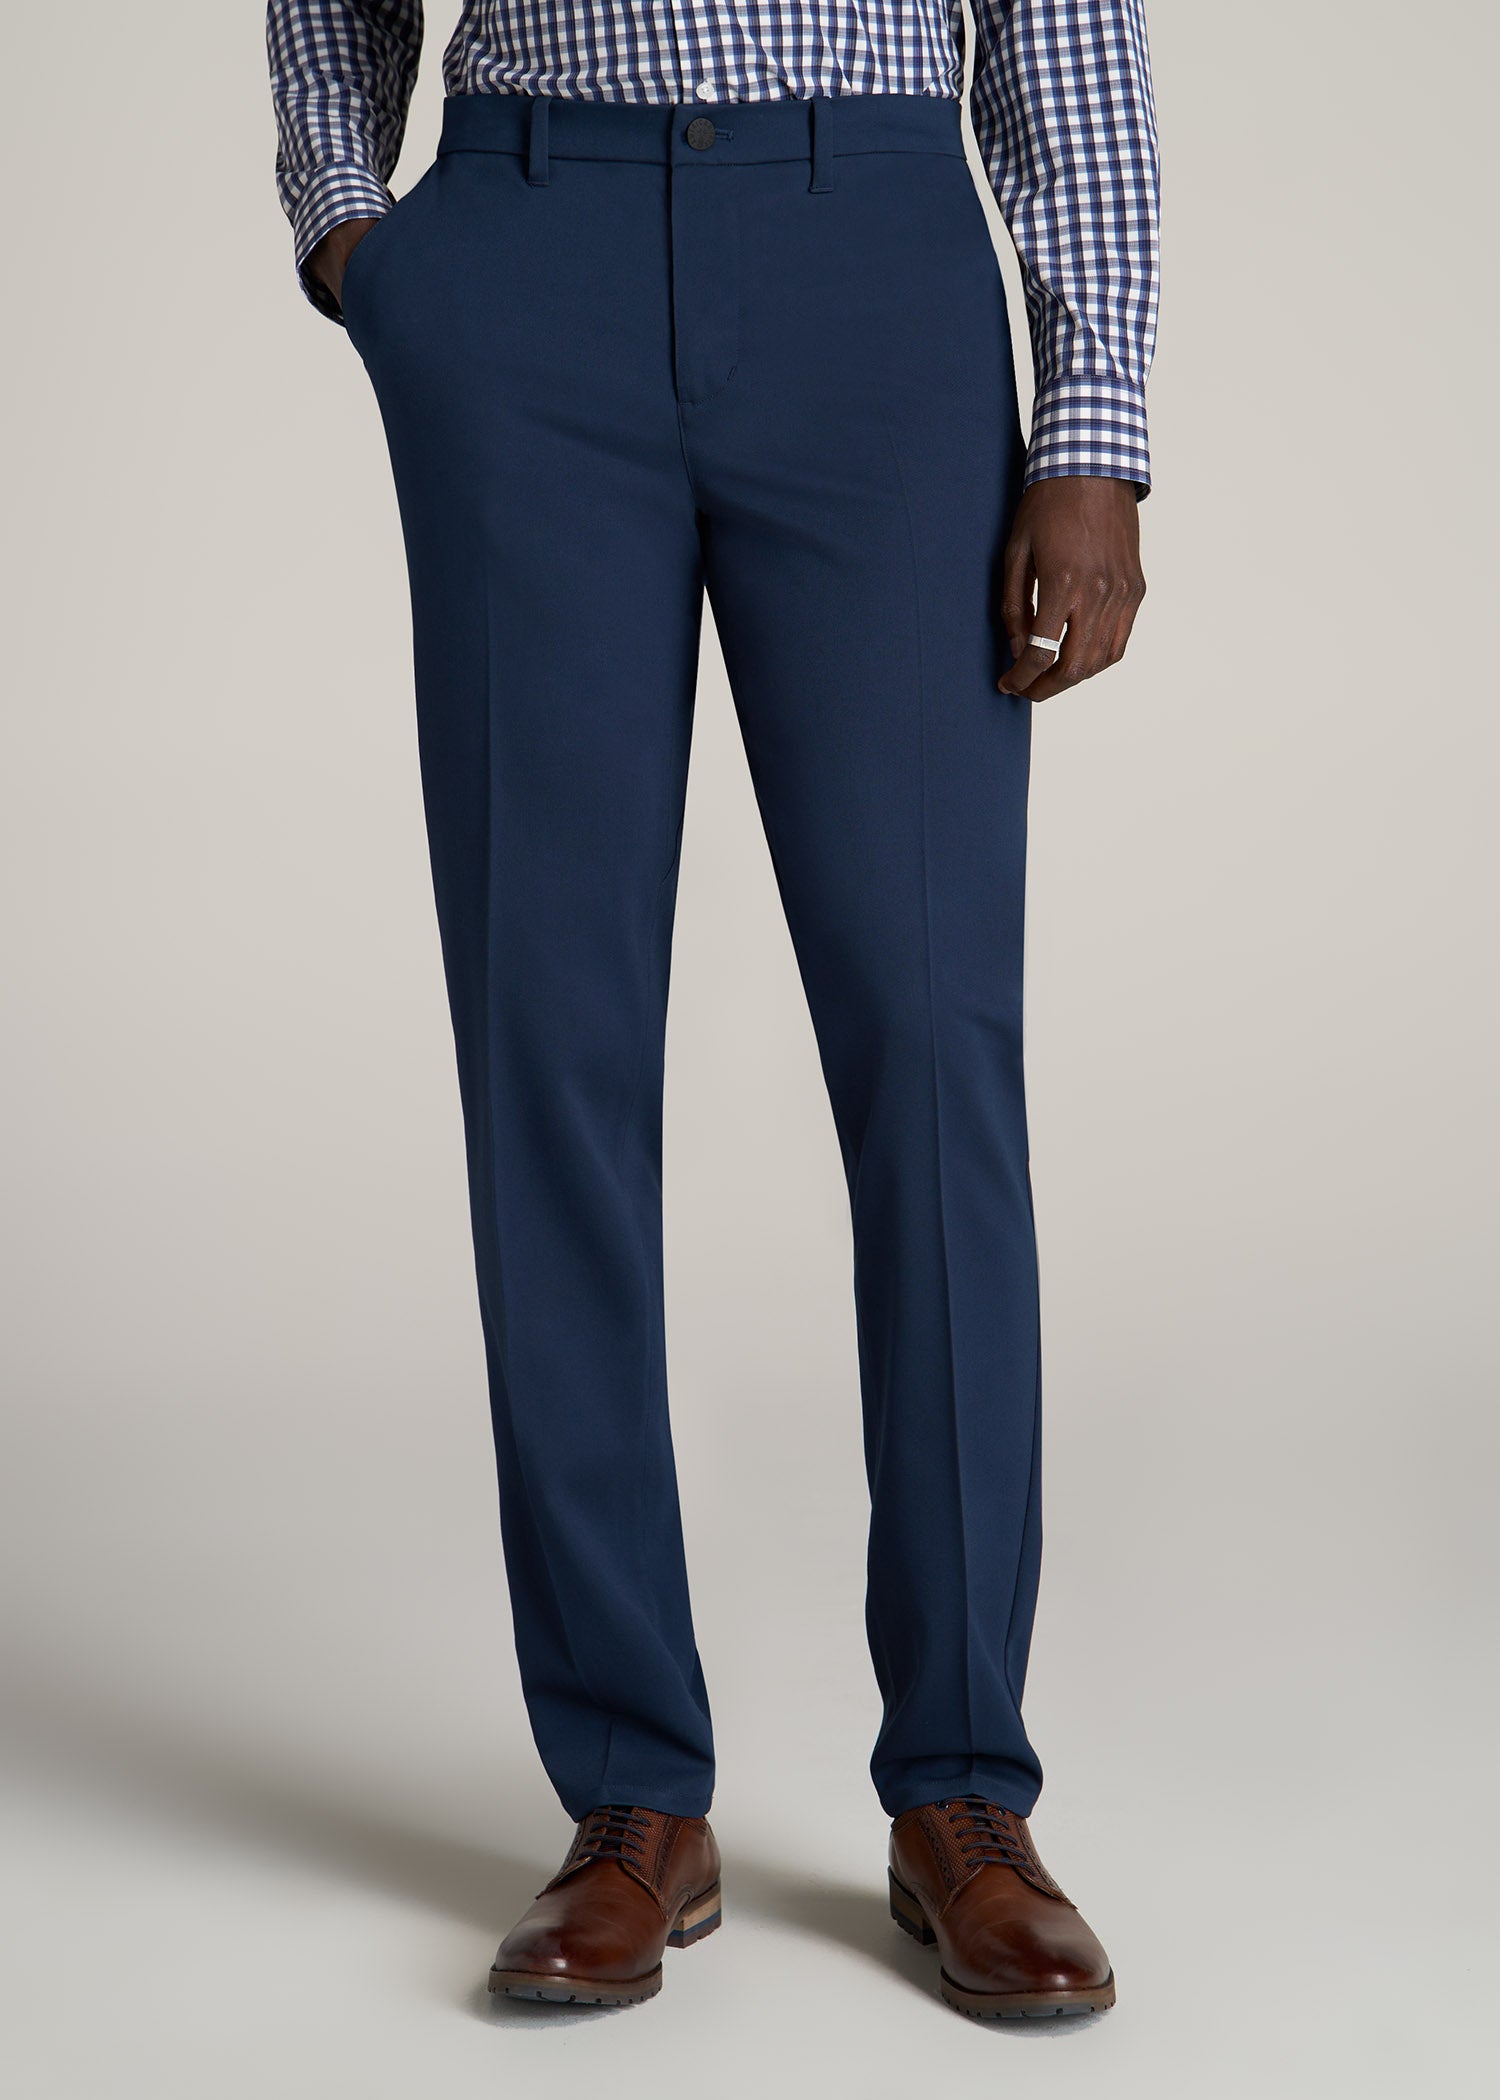 TAPERED-FIT Stretch Dress Pants for Tall Men in Marine Navy